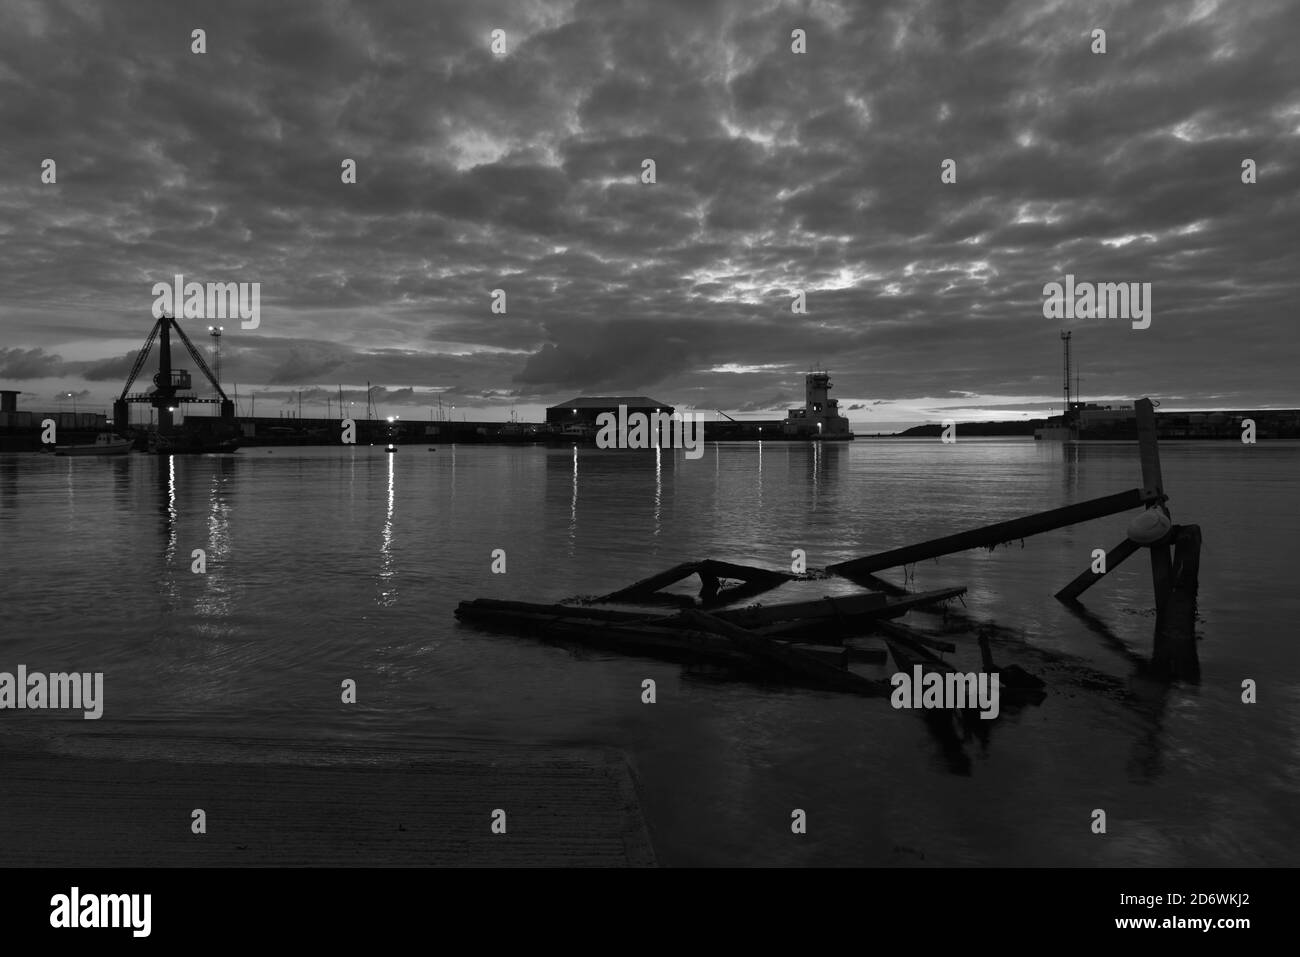 St Helier harbour, Jersey, U.K. B&W image of a calm Autumn high tide, with industrial piers and floating foreground wreckage. Stock Photo